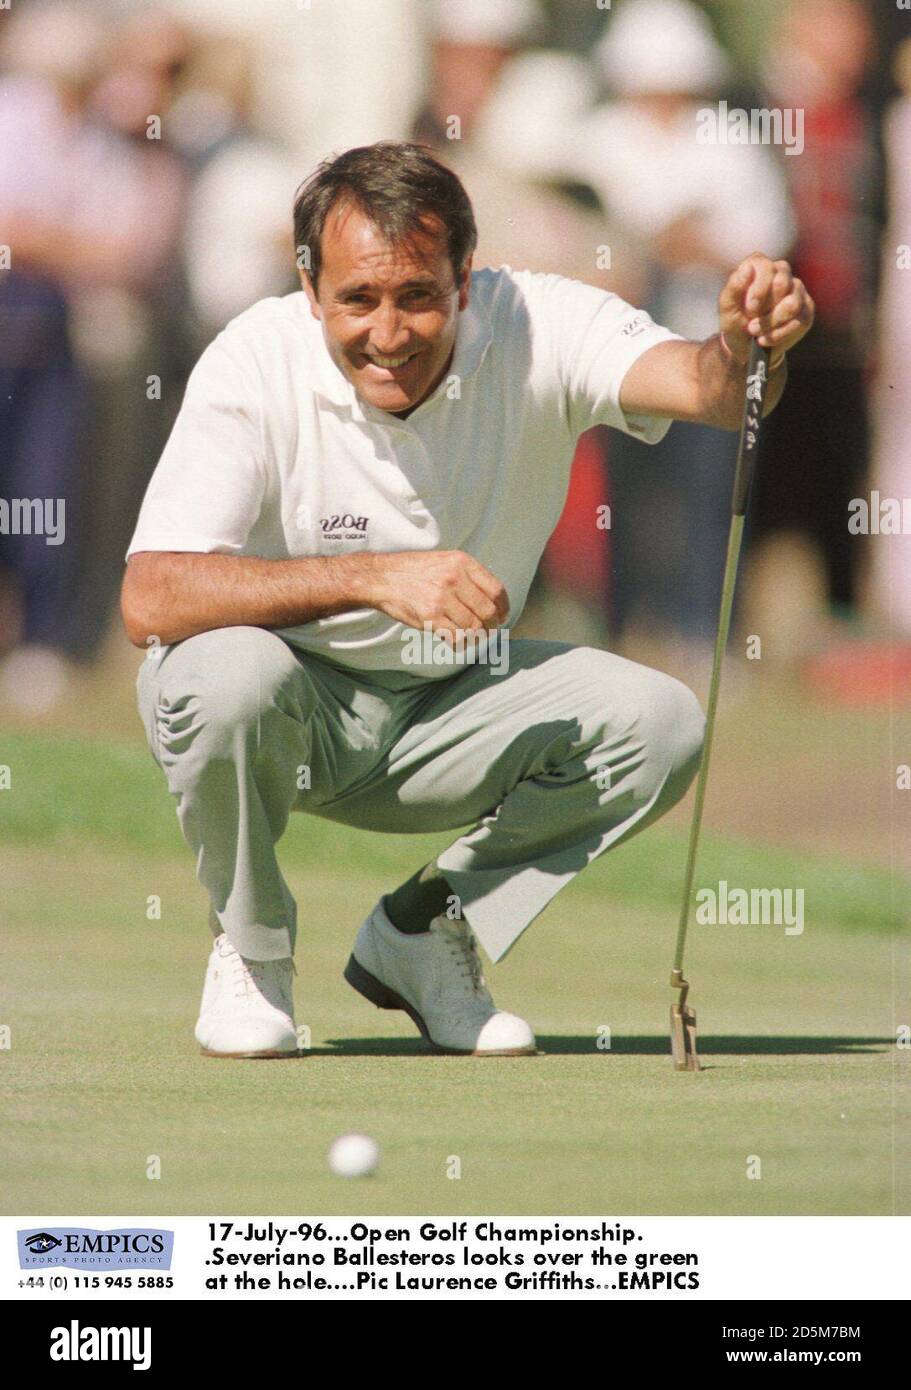 17-July-96. Open Golf Championship. Severiano Ballesteros looks over the green at the hole Stock Photo